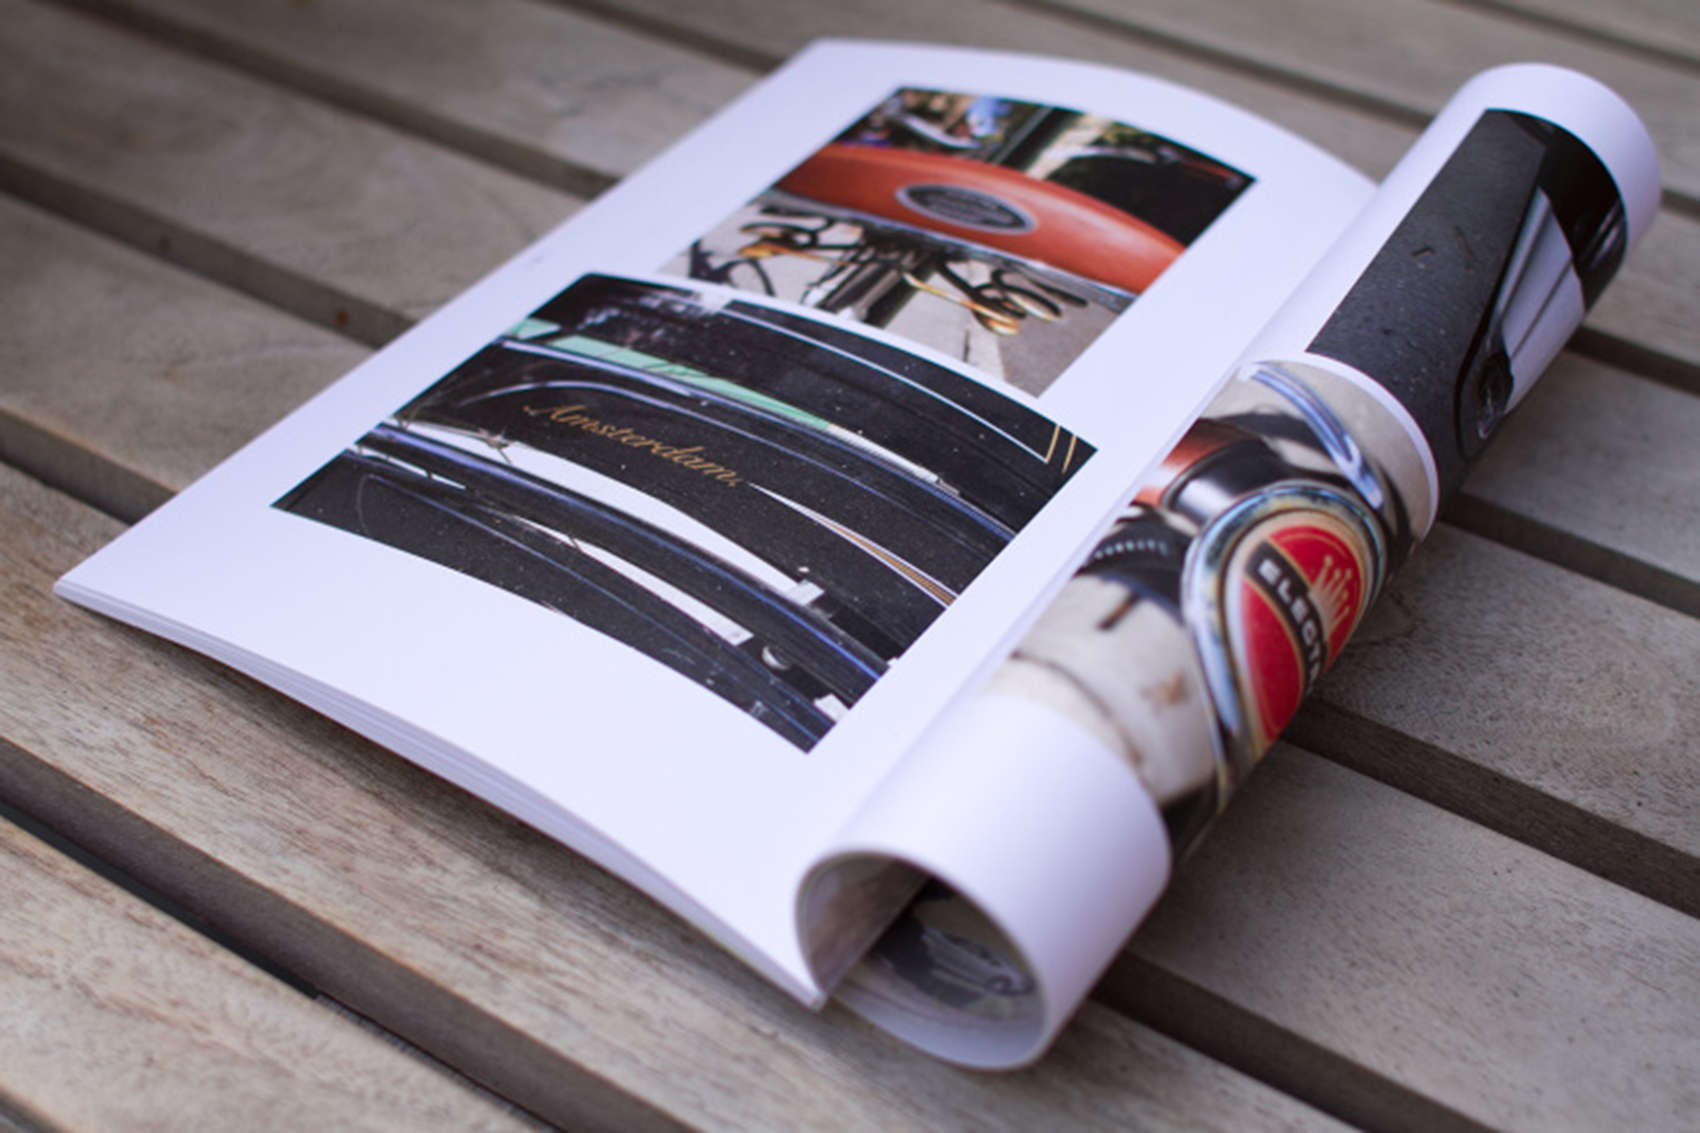 For $8.99 per month, your iPhone camera roll can become a glossy magazine.